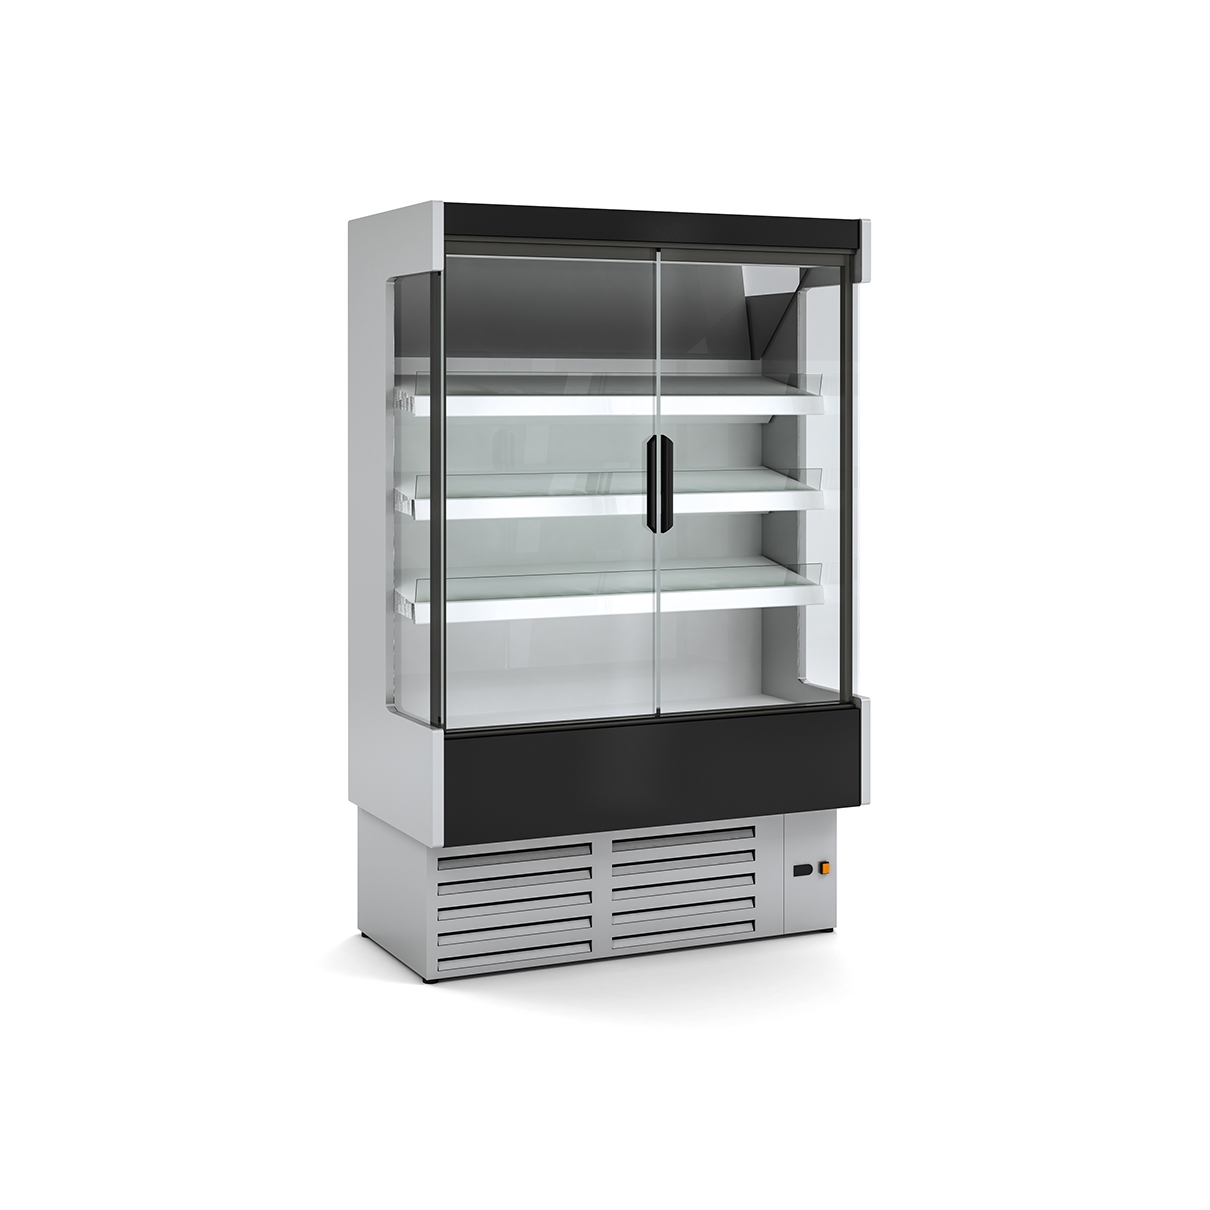 REFRIGERATED WALL-MOUNTED DISPLAY CABINET DG0 H1